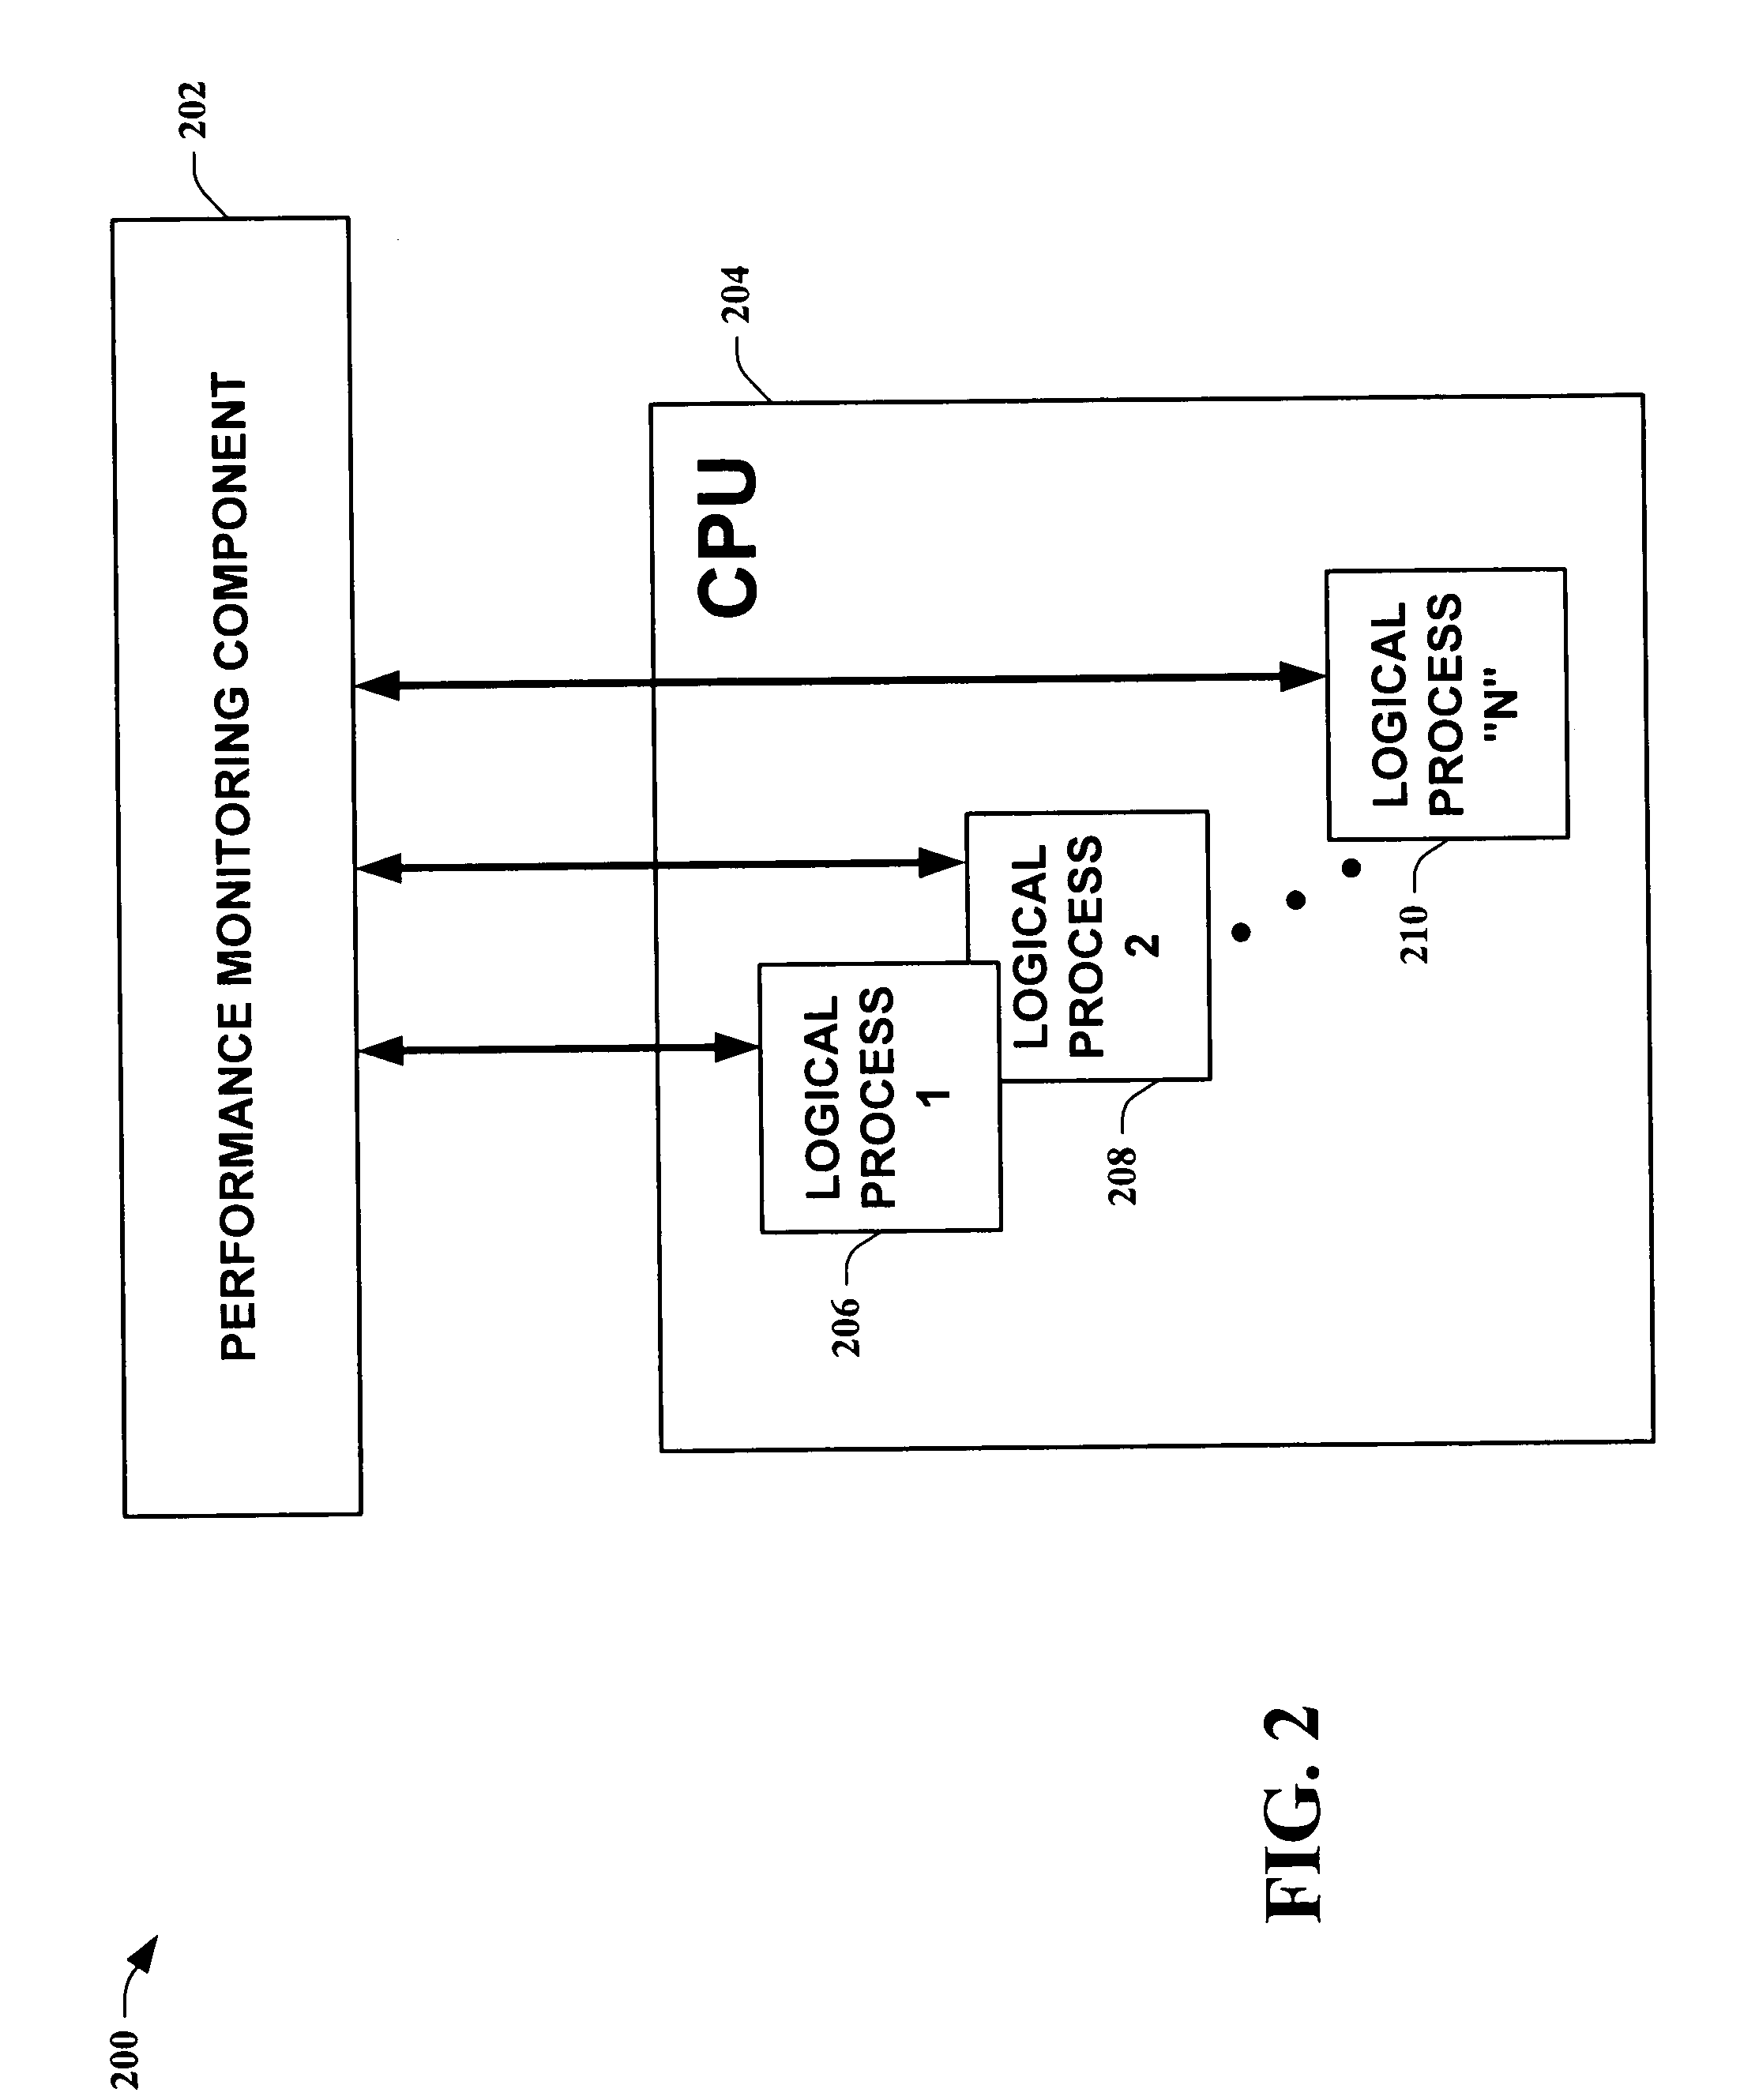 High performance counter for realistic measurement of computer system load